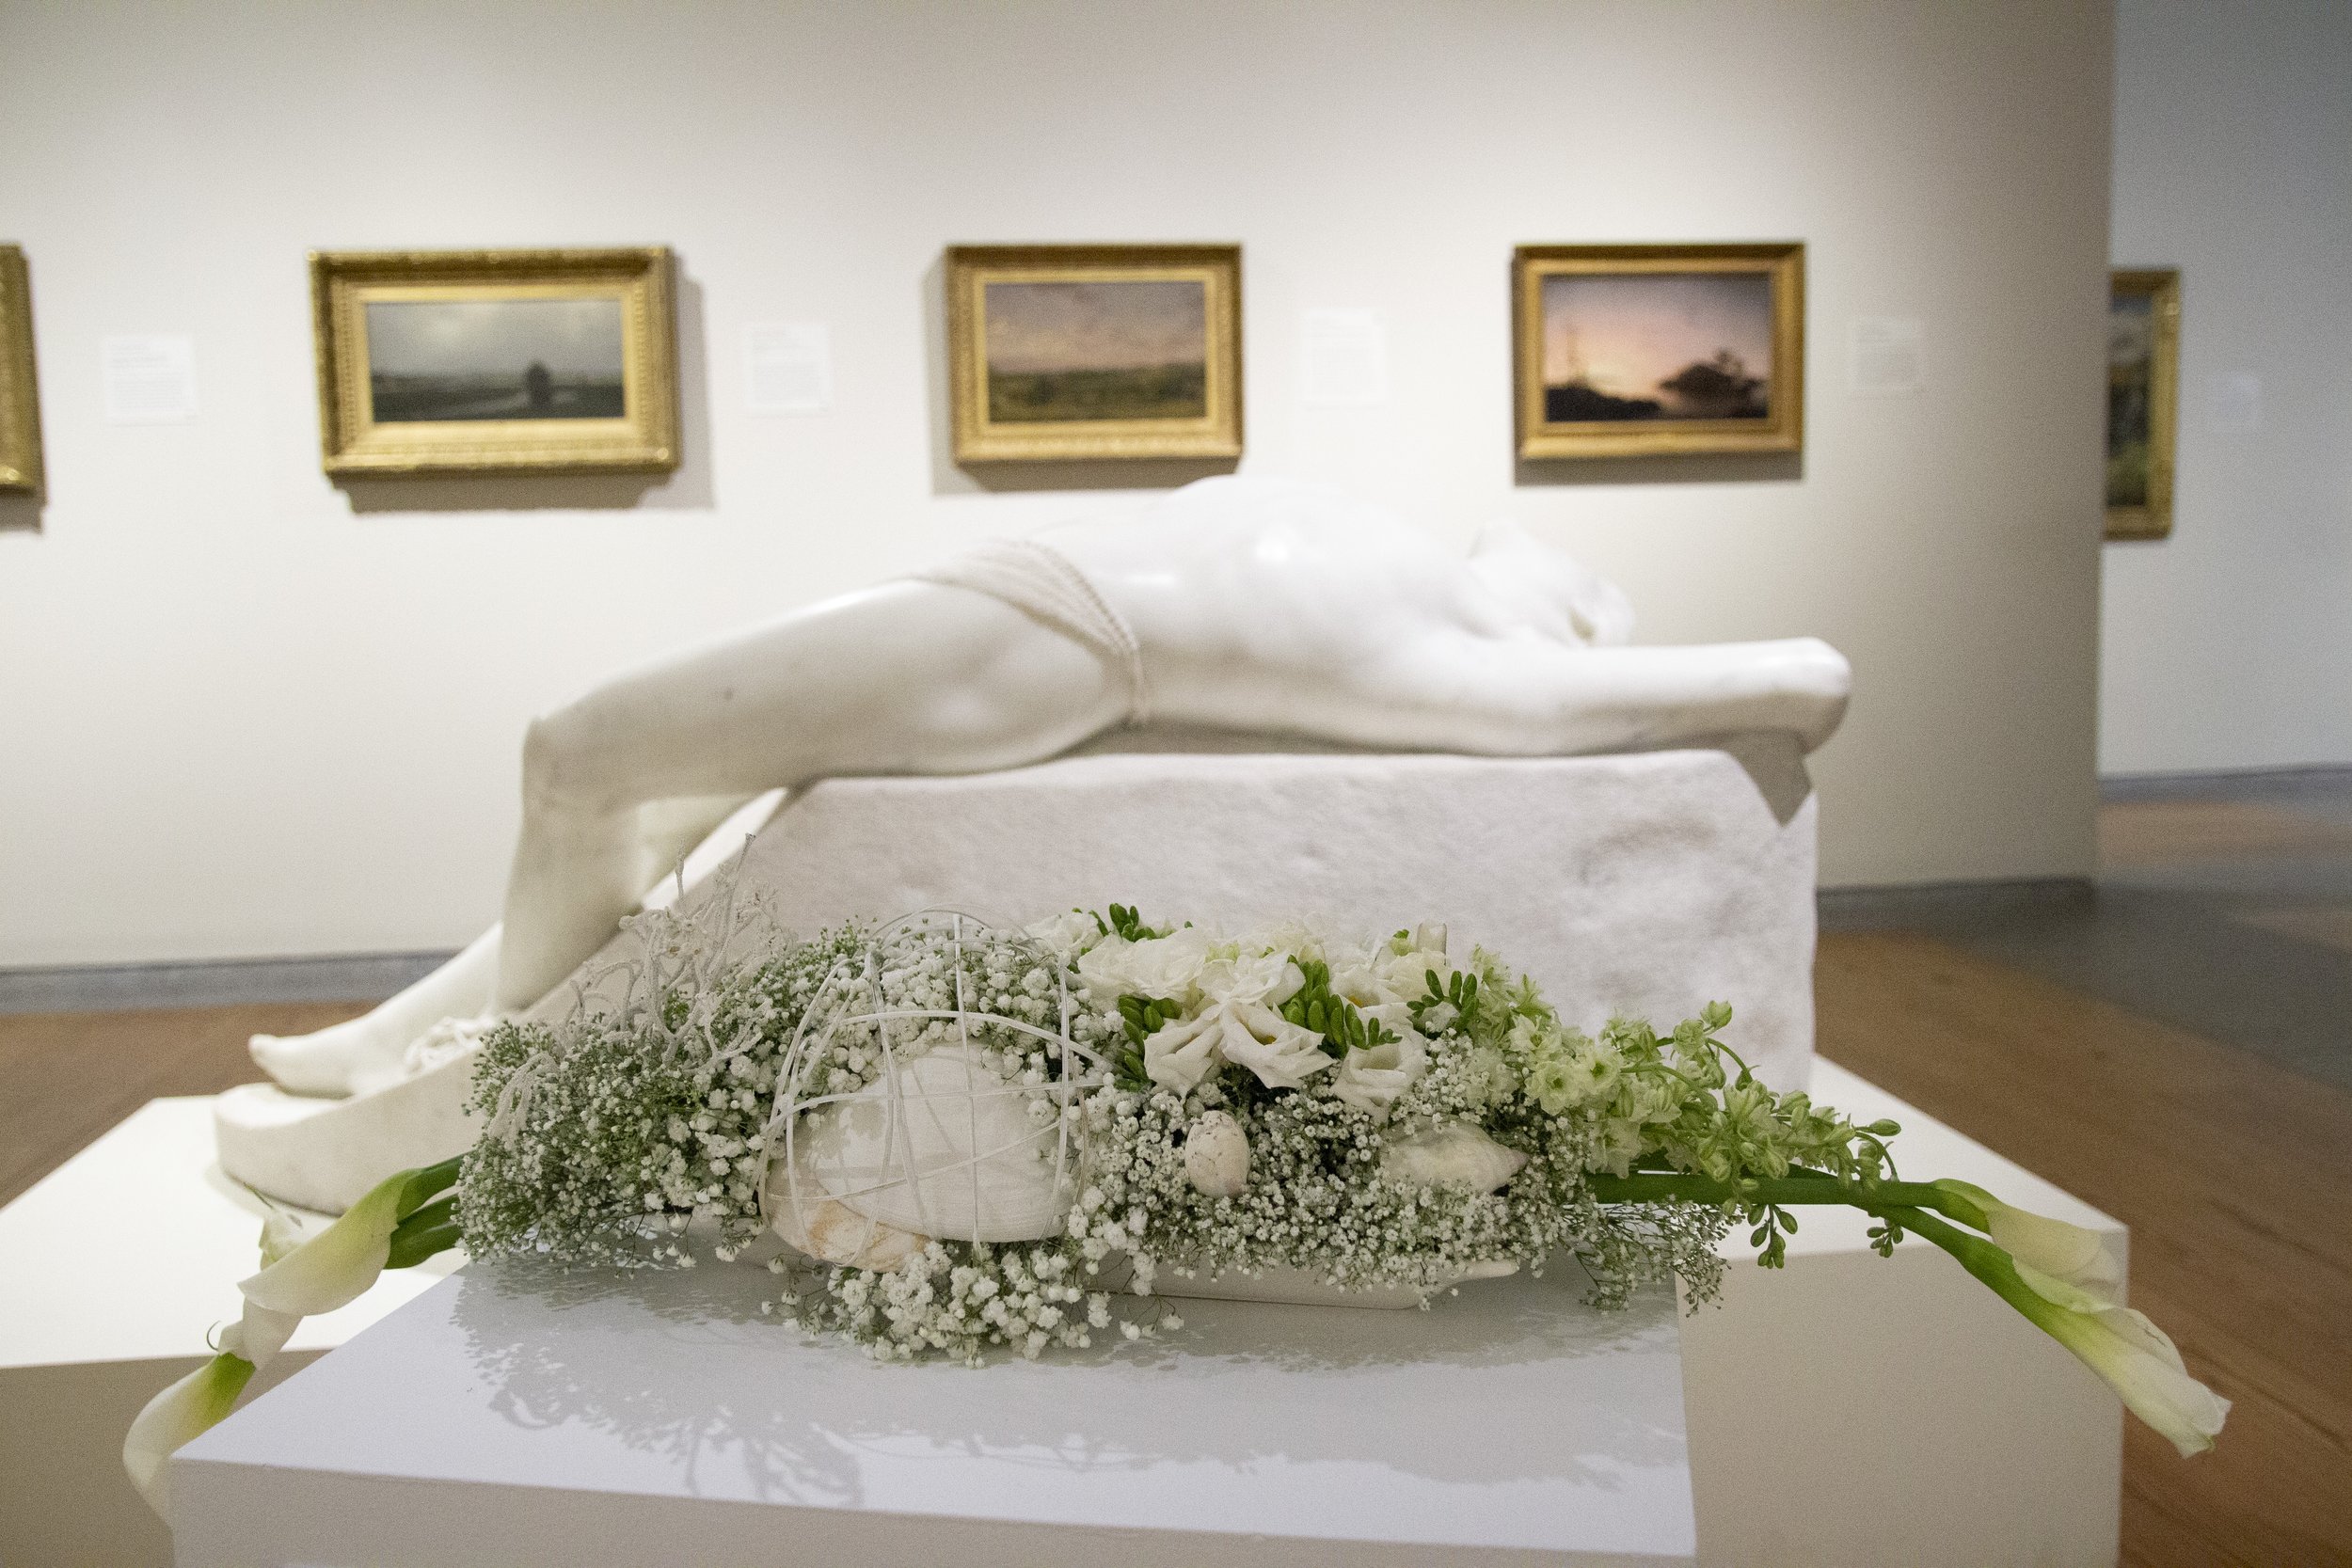   Dan Gifford    Inspiration :  The Dead Pearl Diver  by Benjamin Paul Akers   Materials:  Calla lily, gypsophilia, anemone, larkspur 